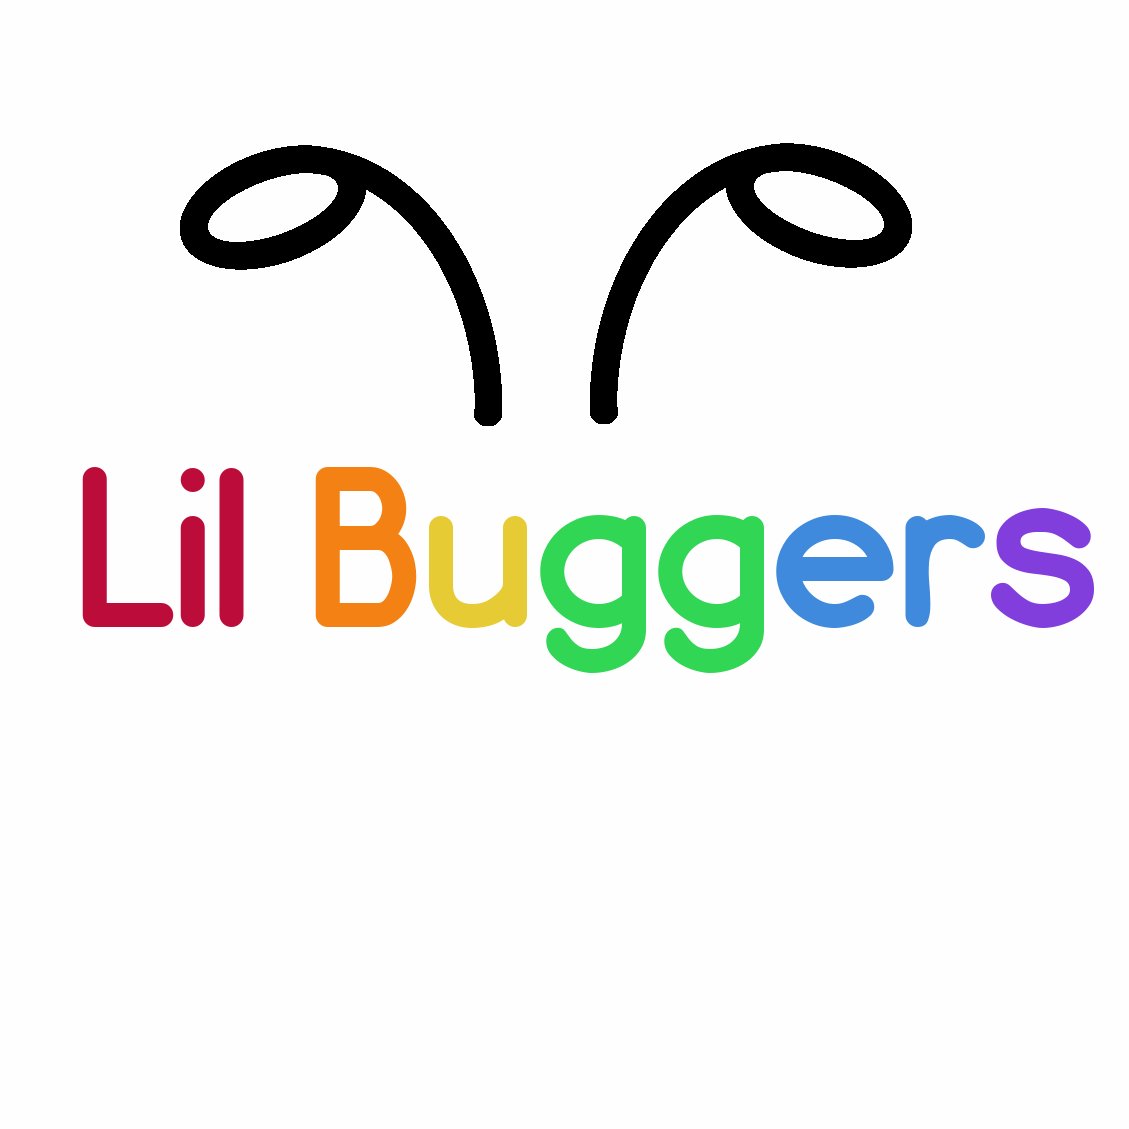 Lil Buggers is the World’s First Chemical-Free, Insect-Resistant Clothes for Kids. Styles launching in summer 2018. Check out https://t.co/0EX5coUMgJ